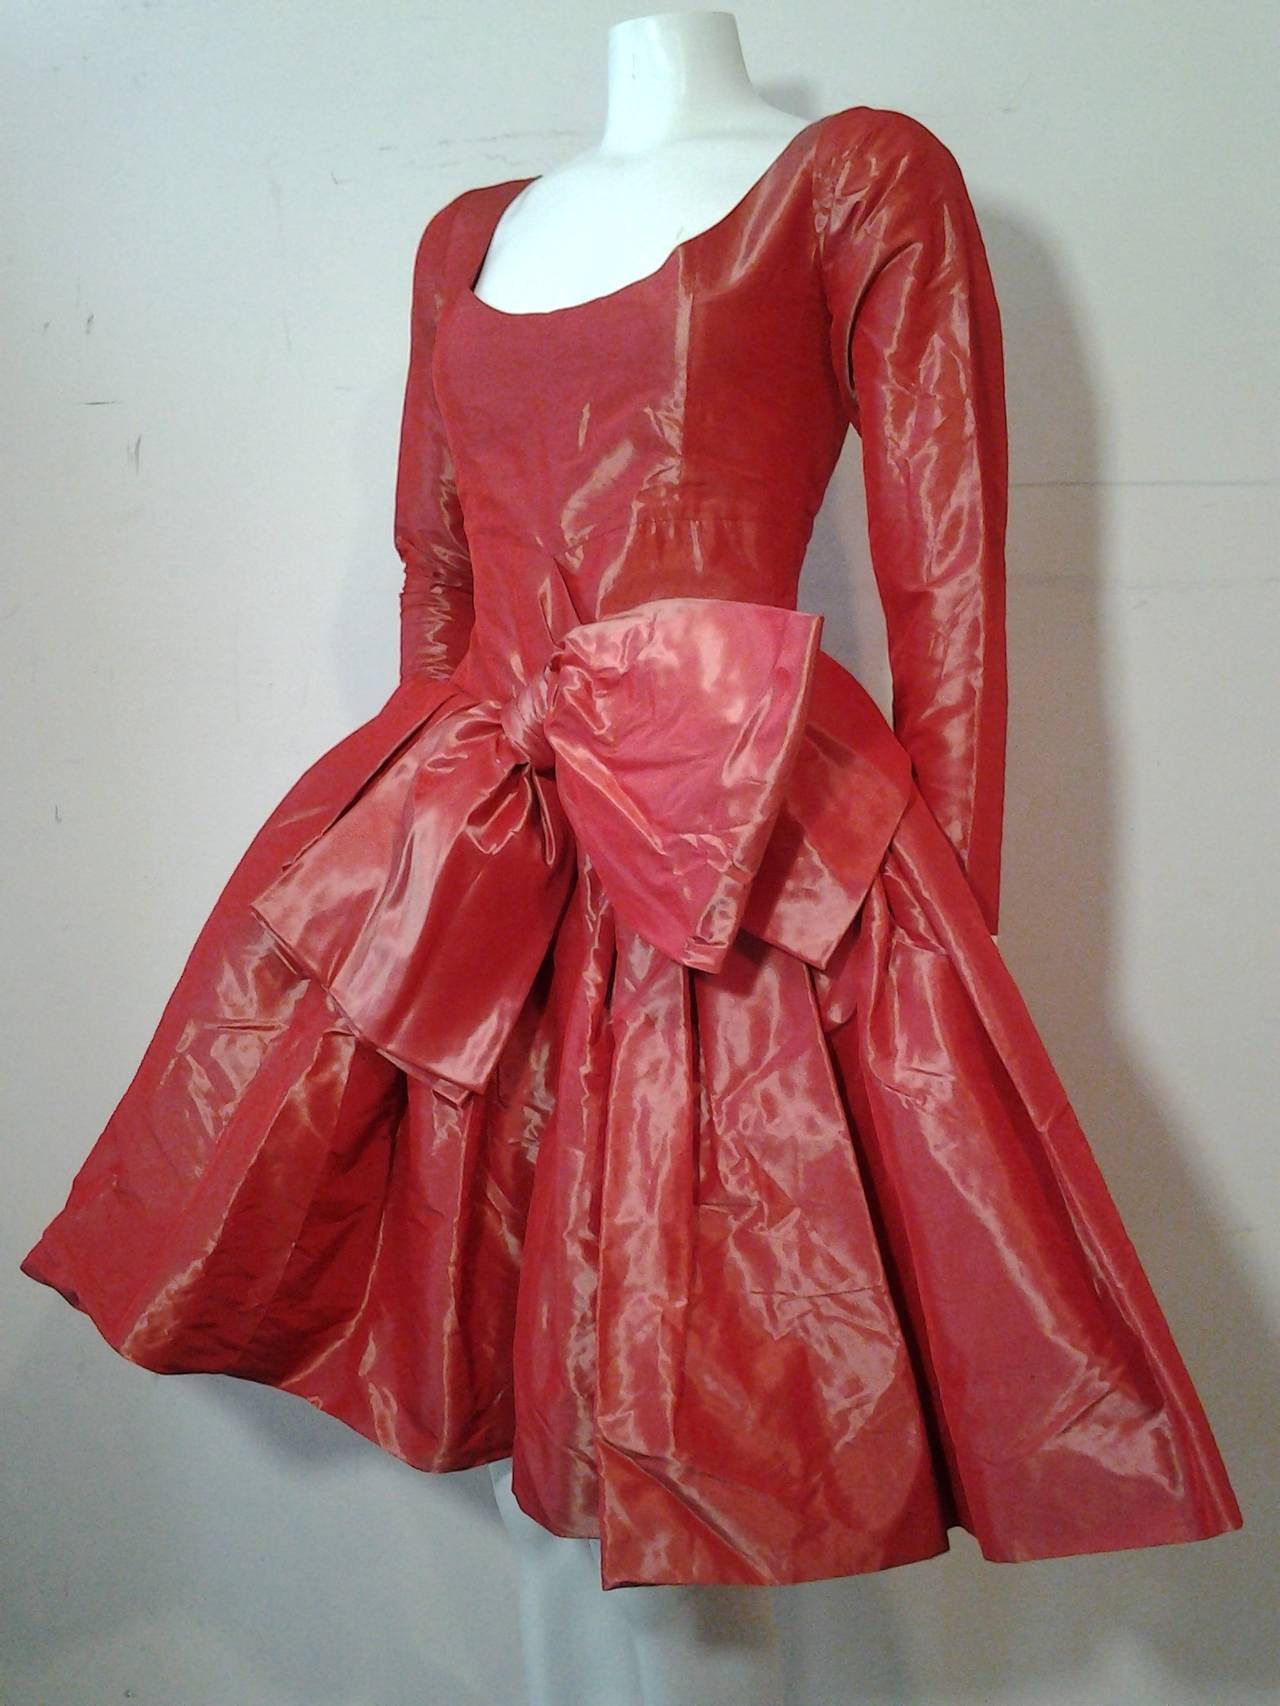 1980s Yves Saint Laurent - Rive Gauche red iridescent sharkskin silk and acetate bubble dress with voluminous skirt and large bow at front. Scoop Ballet-style neckline and fitted long sleeves with zippers at cuff.